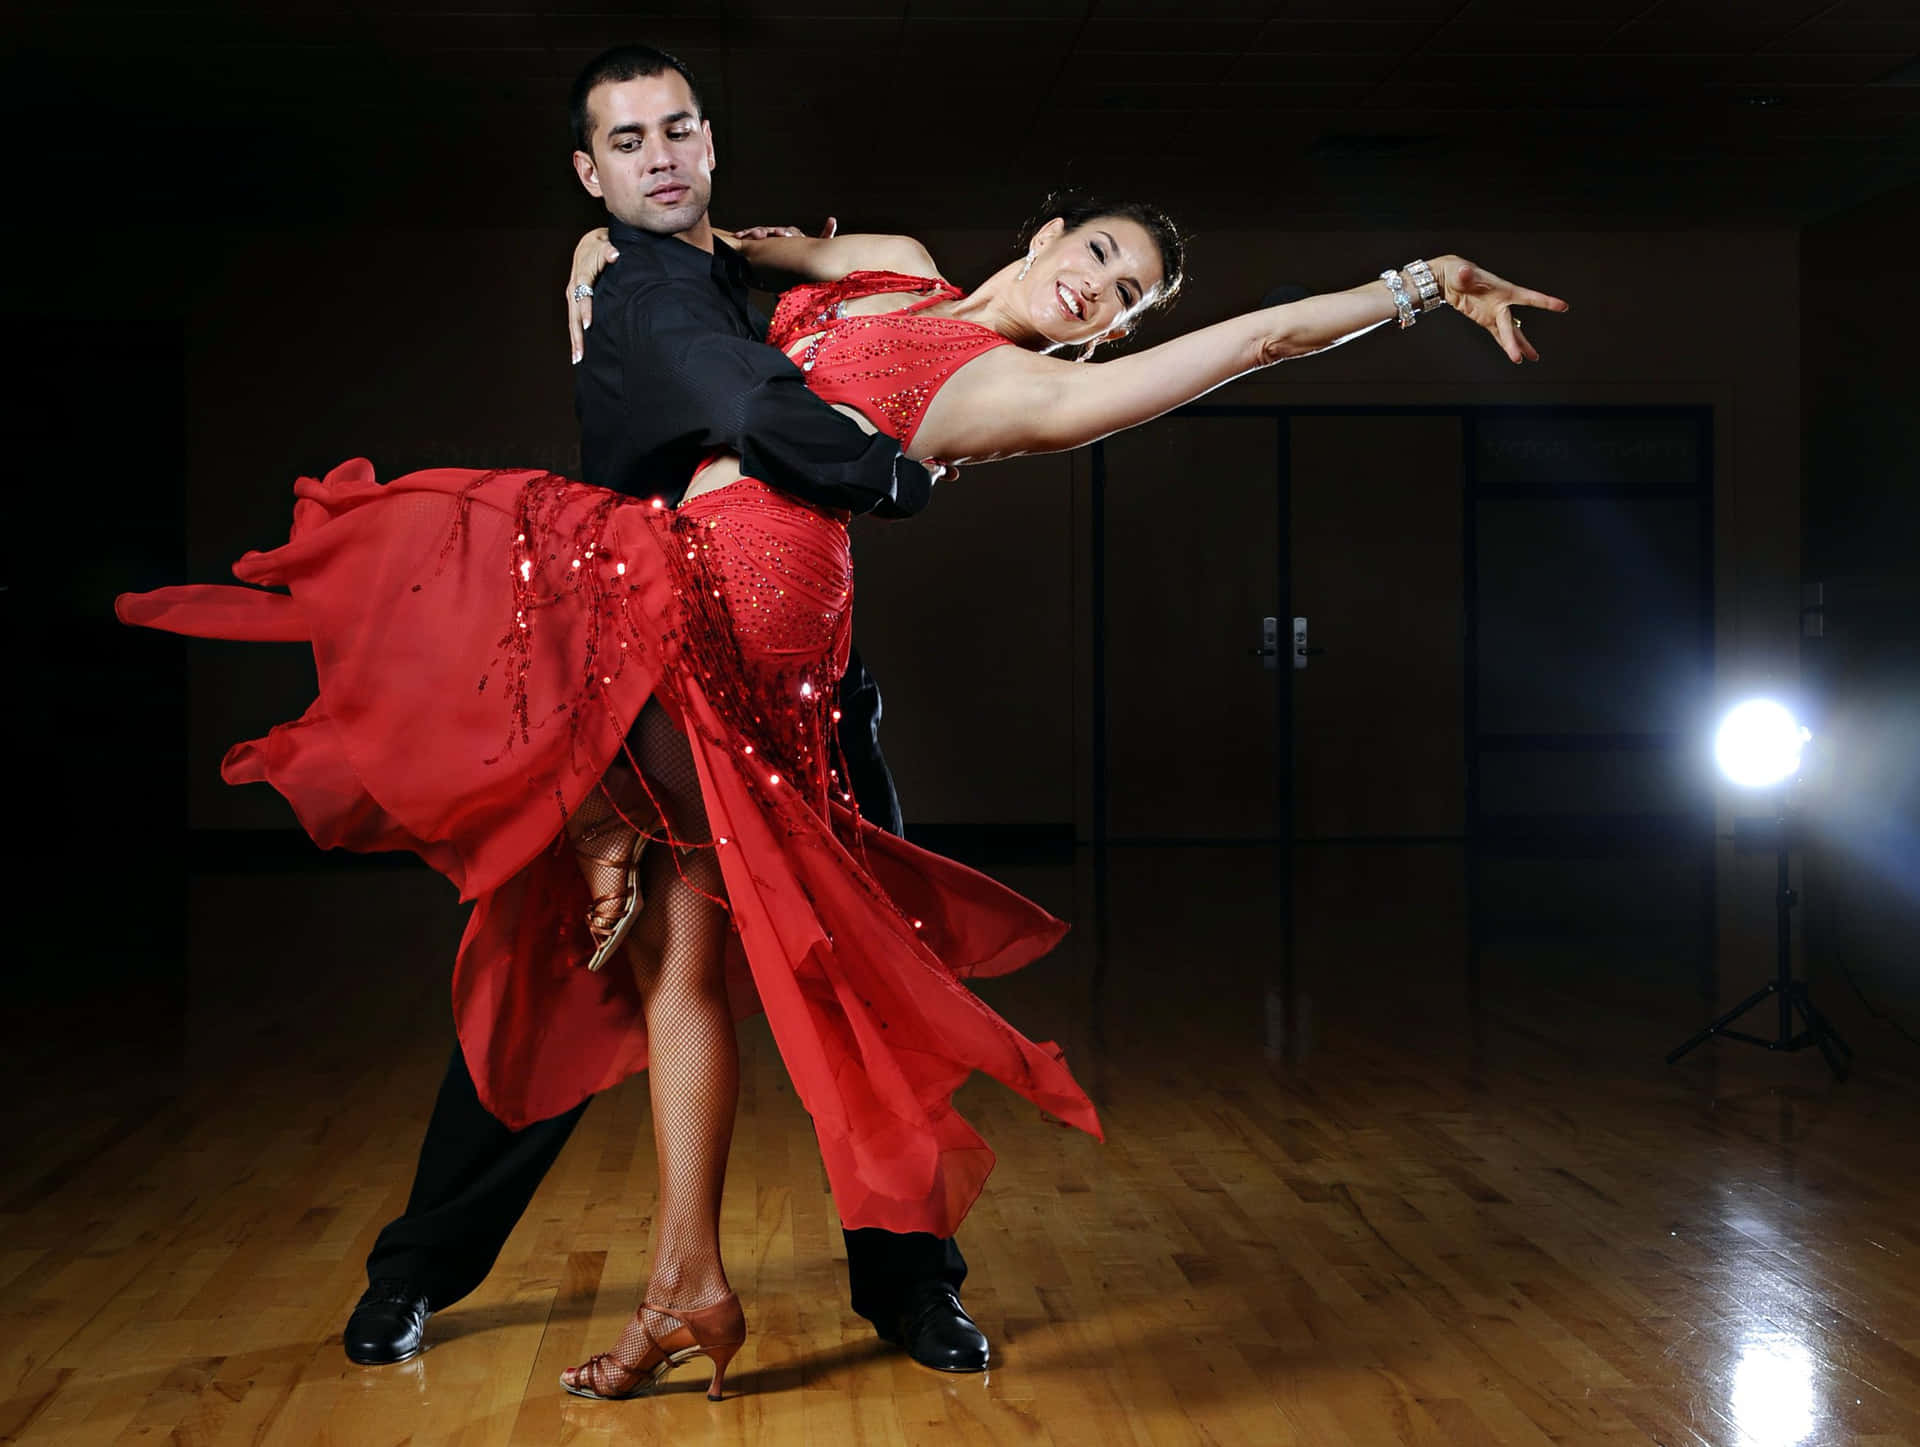 A Couple In Red Dancing In A Dark Room